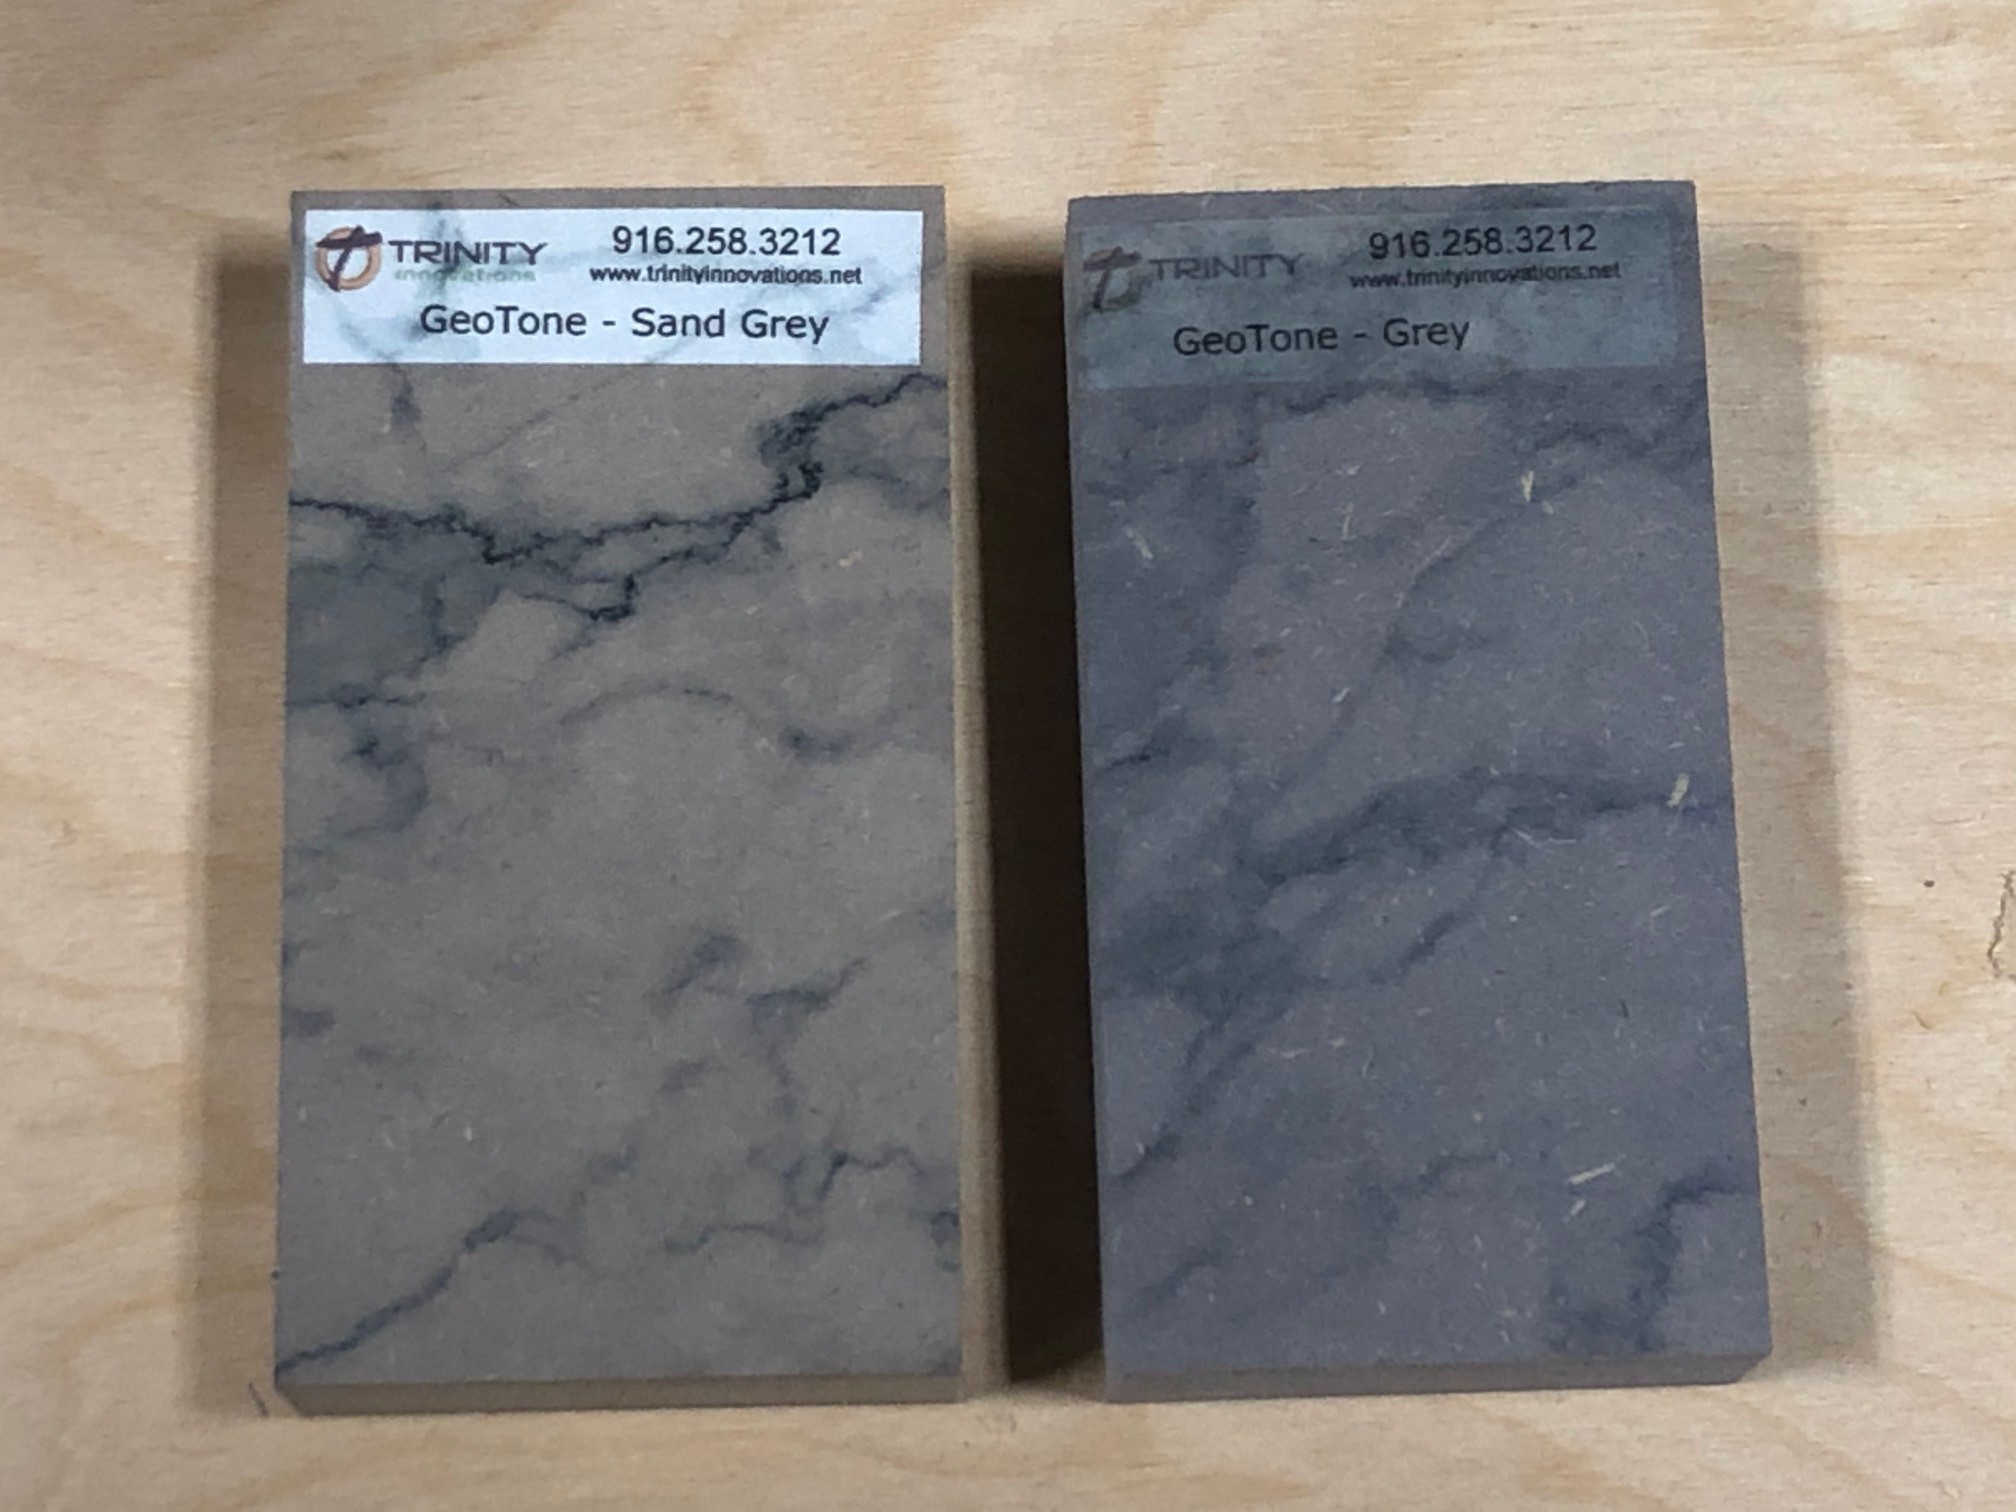 Grey and sand grey options of architectural supply product